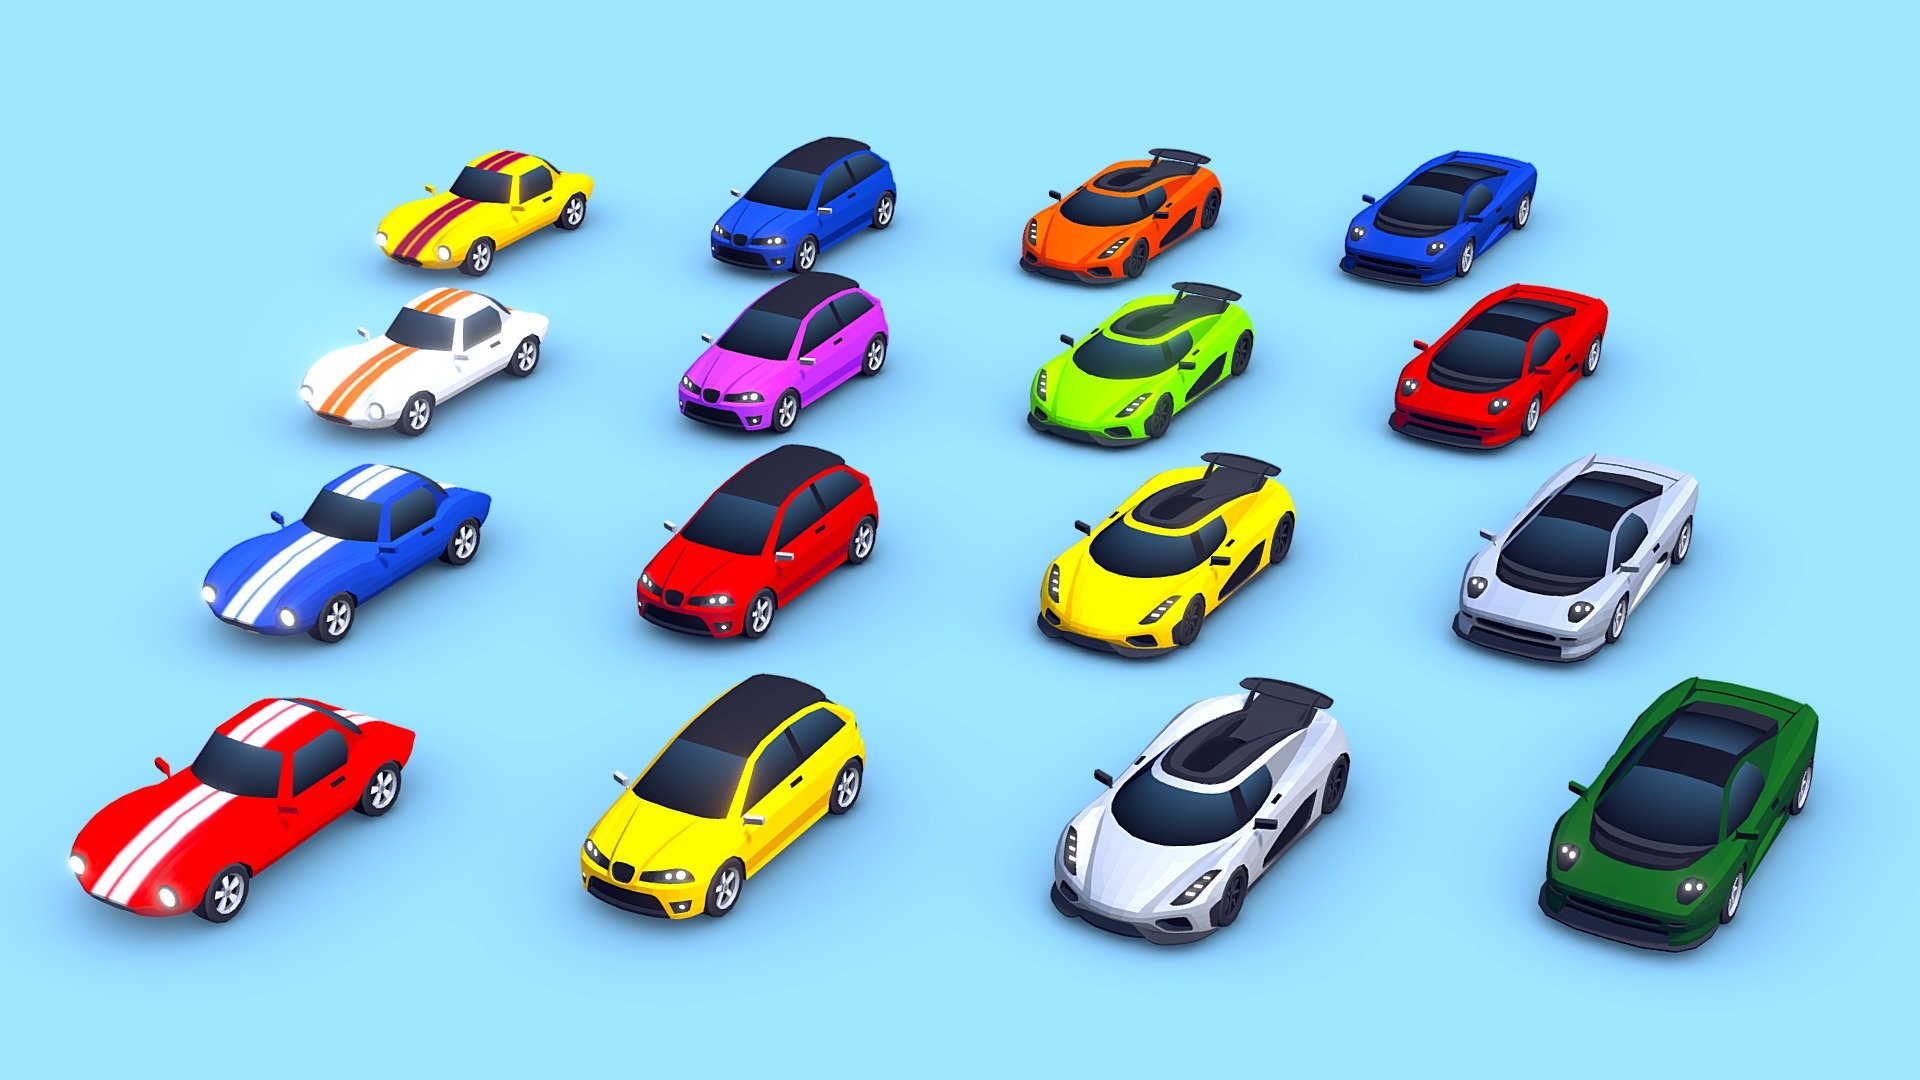 Hello!, this is the June 2023 update of Low Poly Cars - Mega Pack. This is available in the Unity Asset Store and Sketchfab (click here). Update will be available on June 2nd.

It includes 4 new cars: Koenigsegg Regera, Jaguar XJ220, Seat Ibiza 2003 and Ginetta G4 3d model